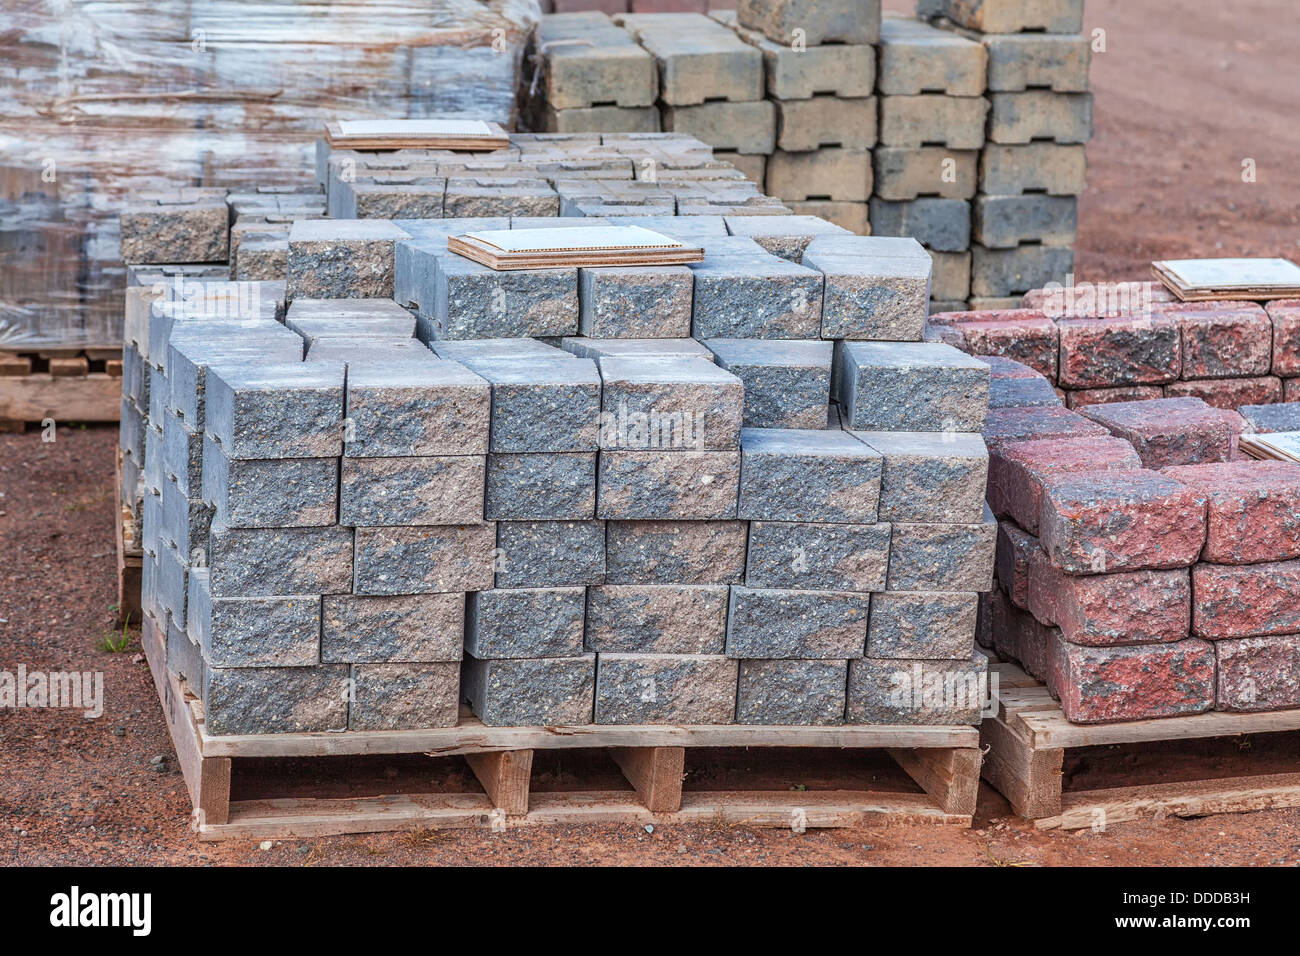 Stacks of various colored concrete pavers (paving stone) or patio blocks  organized on wooden pallets and for sale in a retail se Stock Photo - Alamy